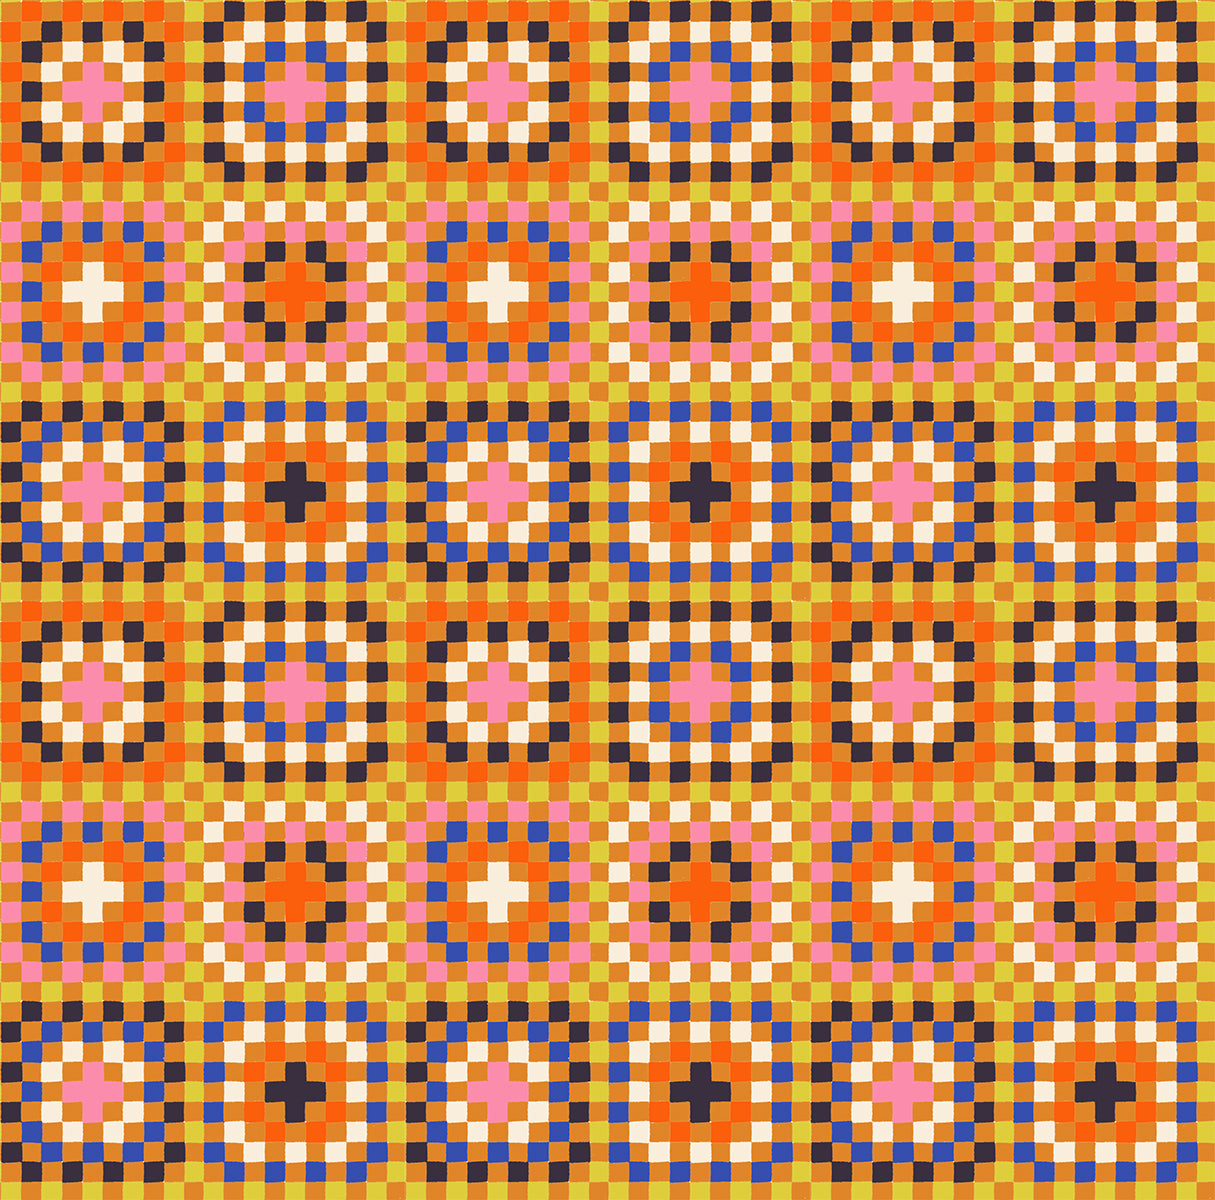 Granny Square- Caramel from Meadow Star by Alexia Abegg for Moda Fabrics